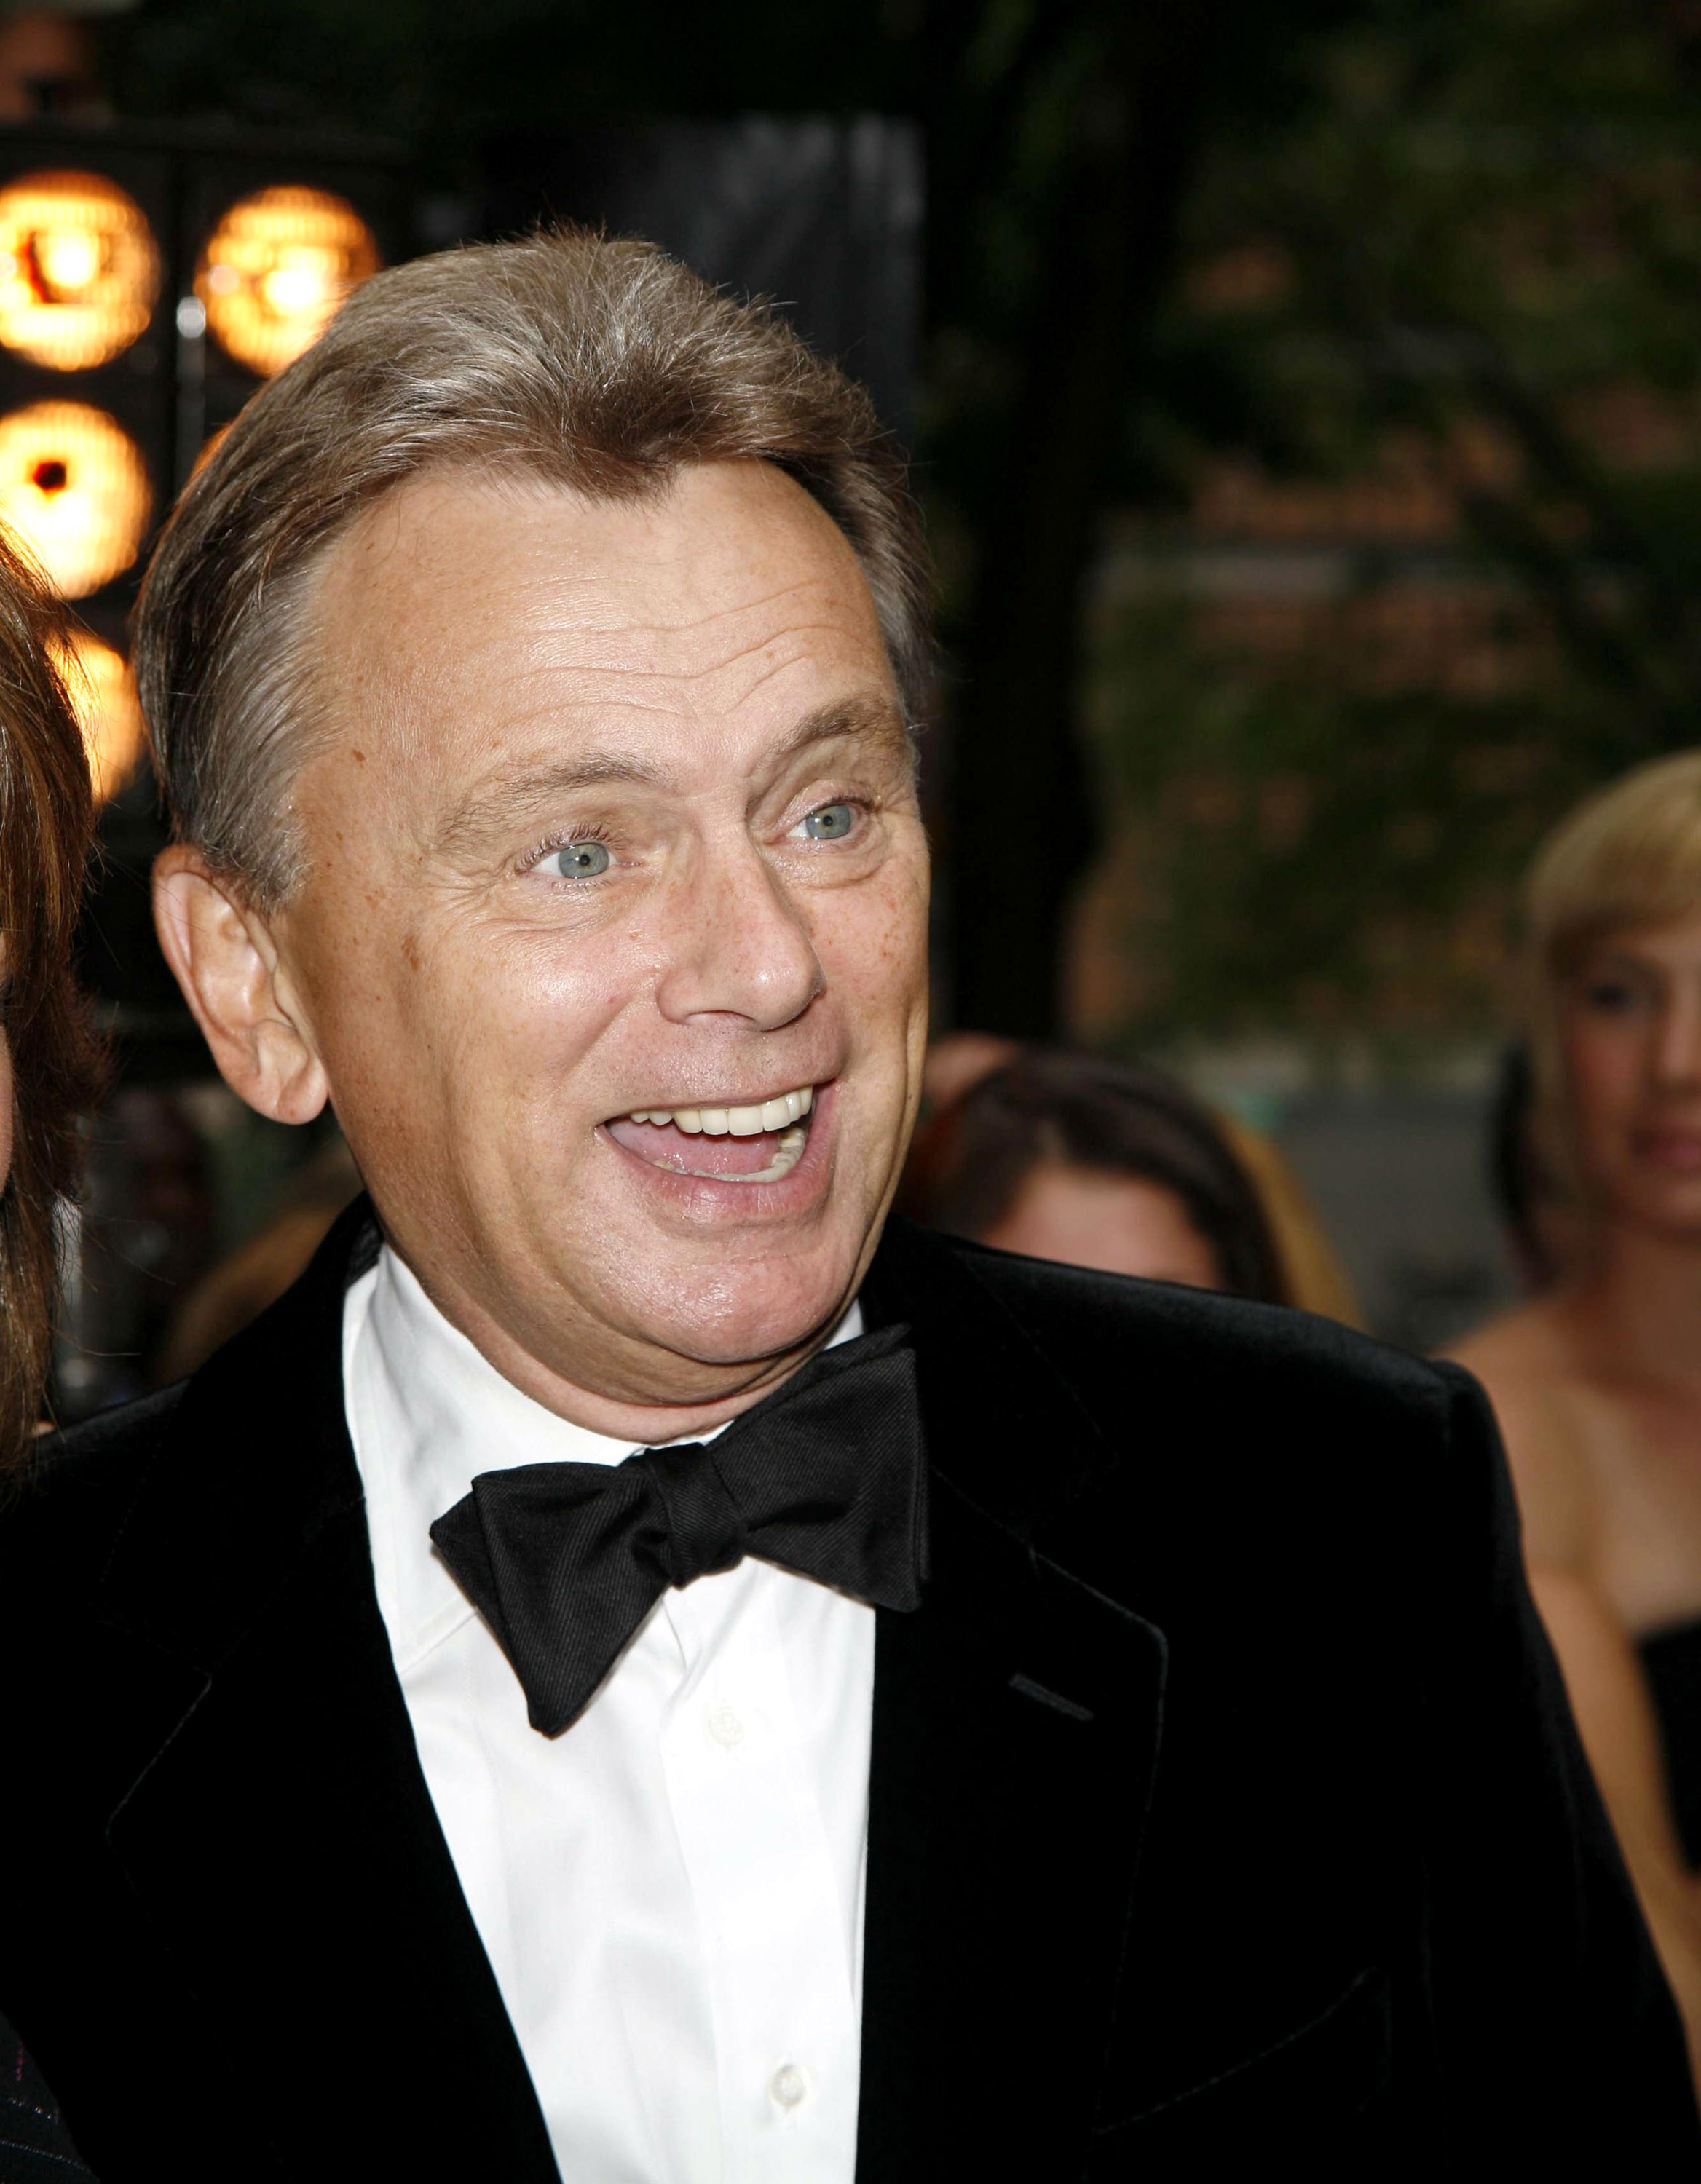 Pat Sajak hosts the Fourth Annual Relly Awards on "Live with Regis and Kelly" at ABC-TV Studios in Manhattan in New York City, United States. | Source: Getty Images